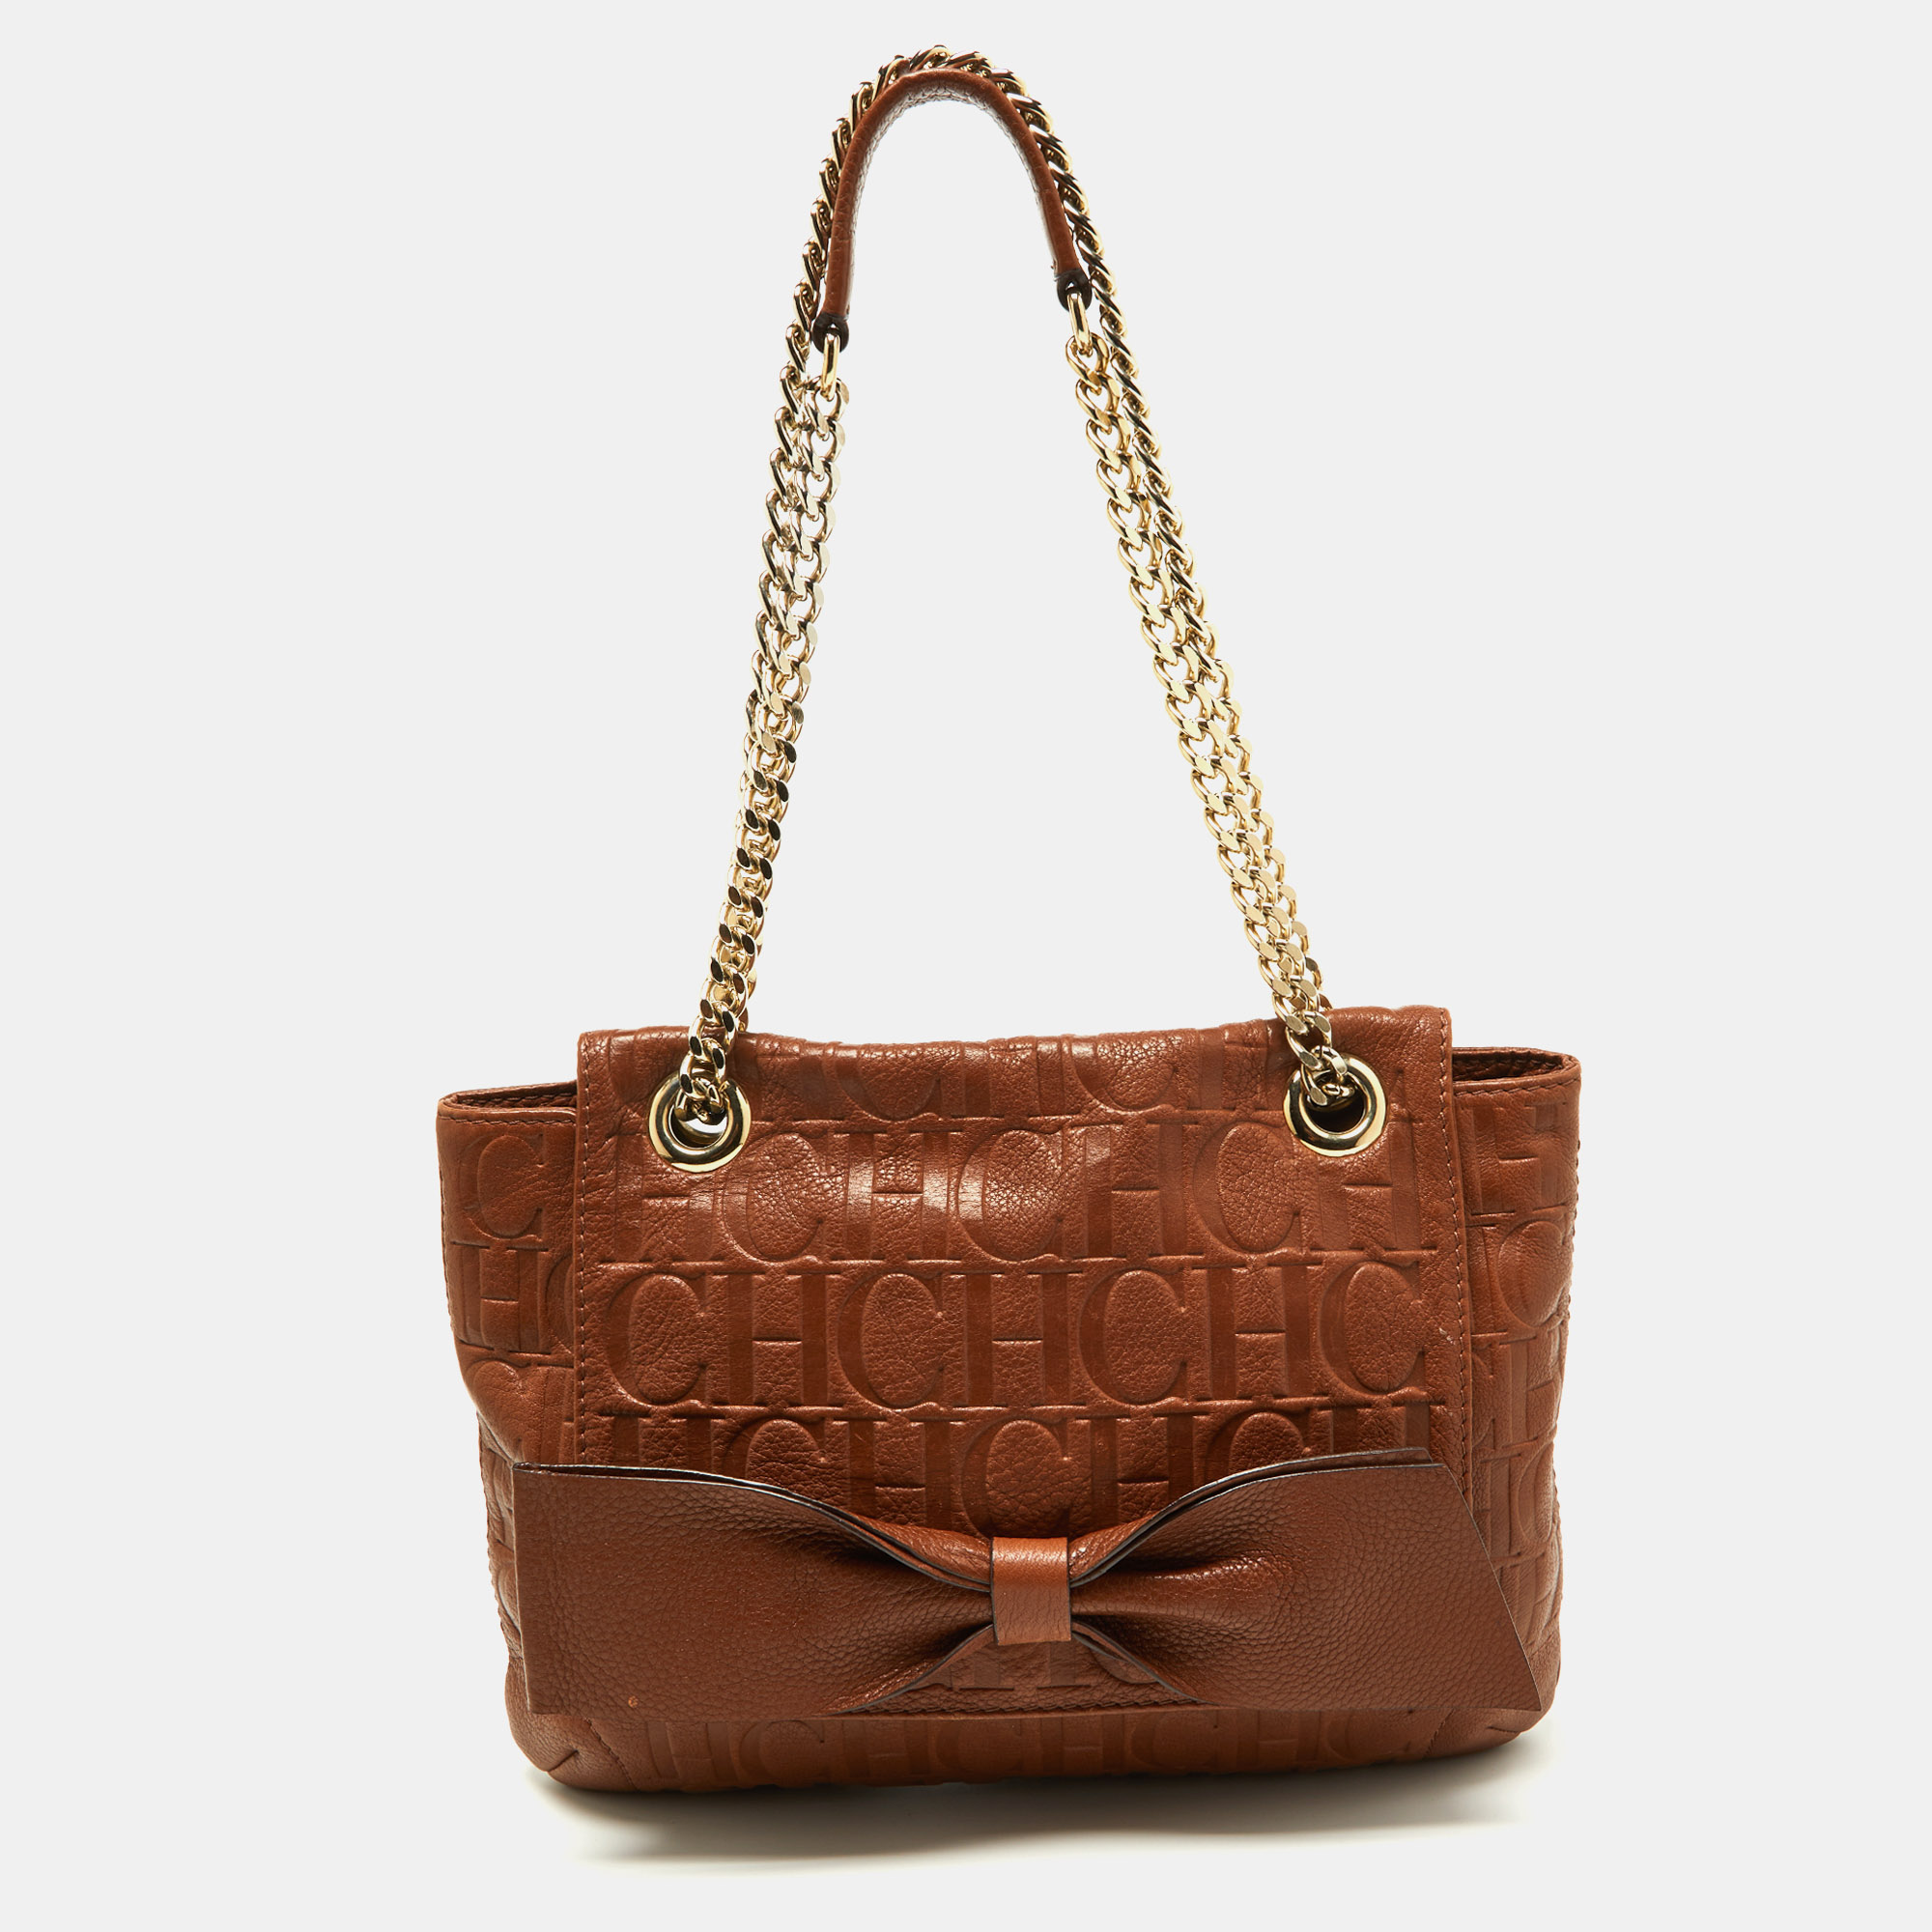 A visual treat to the eyes this Carolina Herrera Audrey bag is a must have. Created from the signature monogram leather in a brown hue it has been styled with a bow adorned front flap and a back slip pocket. The chain leather shoulder strap and a roomy interior ensure an easy carrying experience.